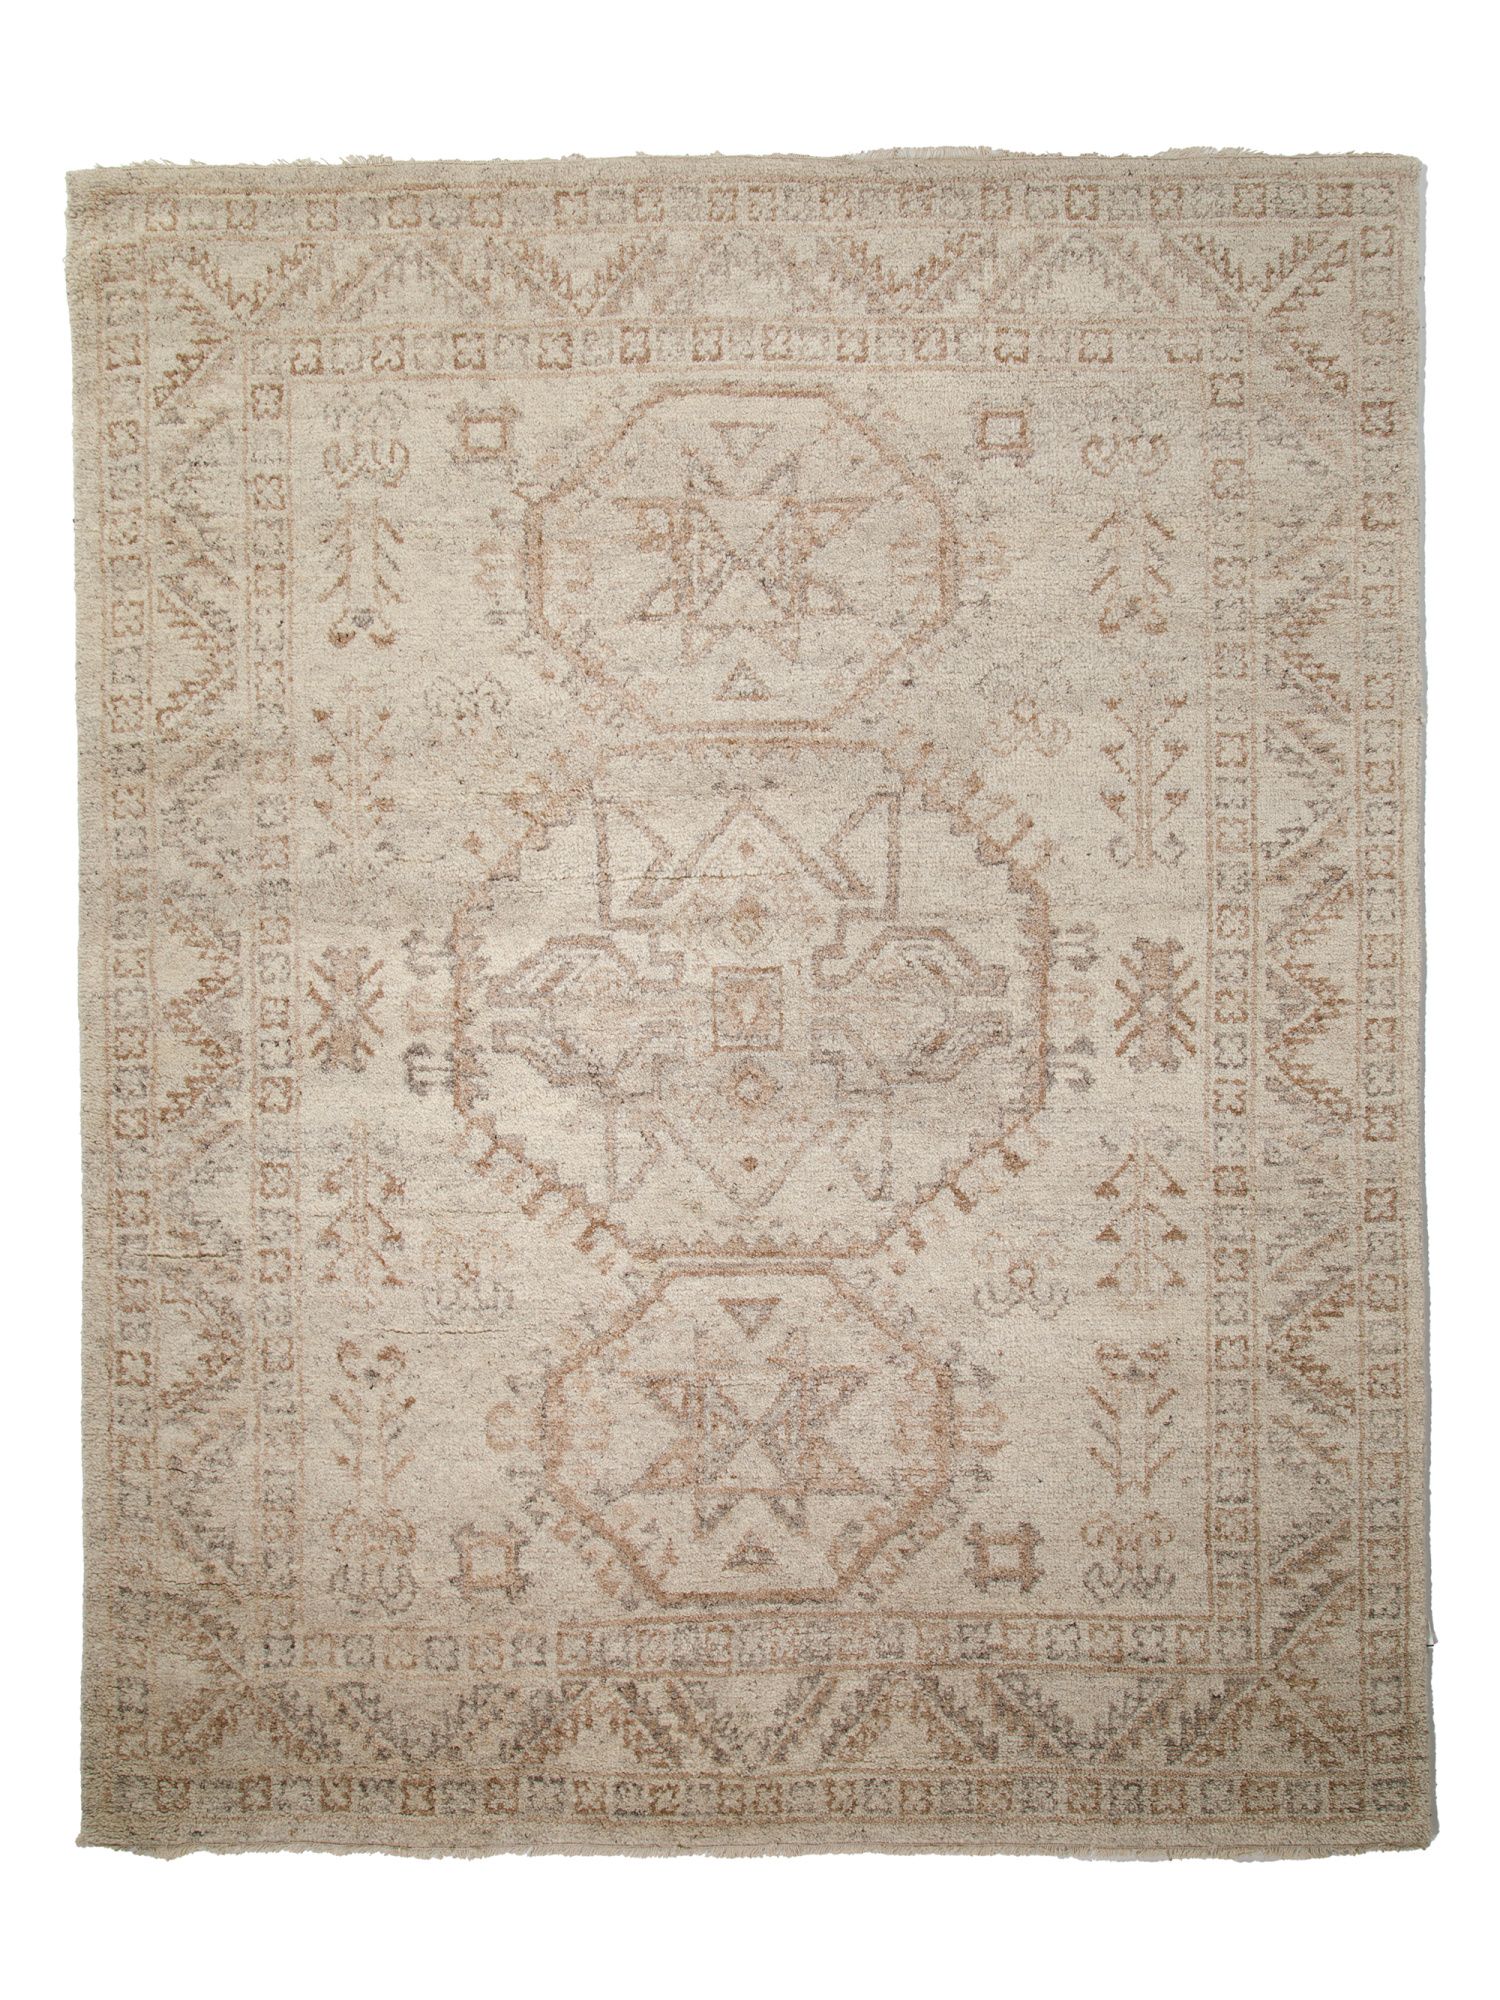 8x10 Wool Hand Knotted Rug | TJ Maxx